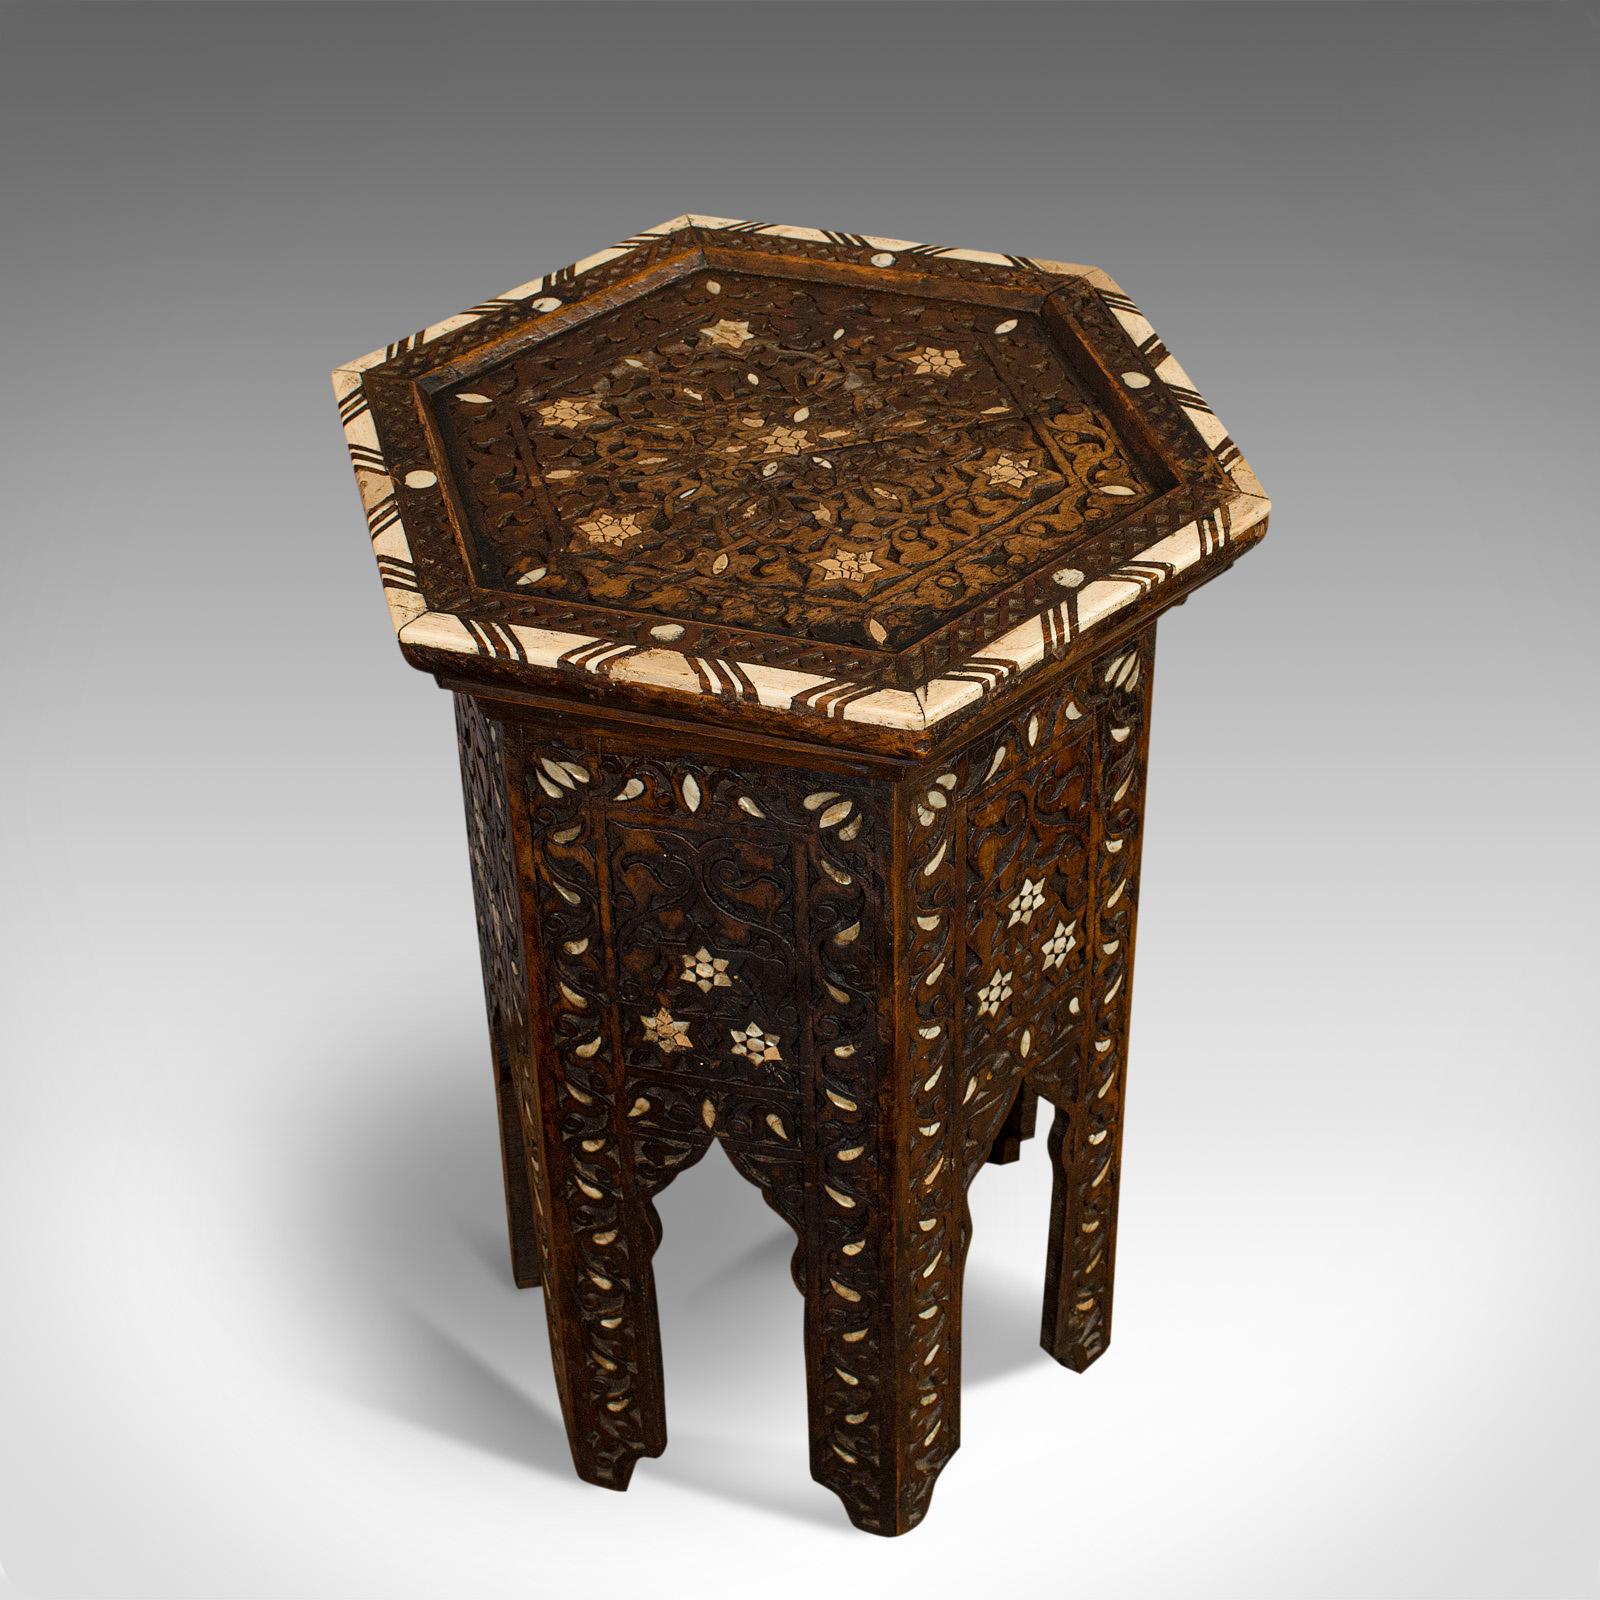 Carved Side Table, Middle Eastern, Mahogany, Moorish, Wine, Occasional, circa 1880